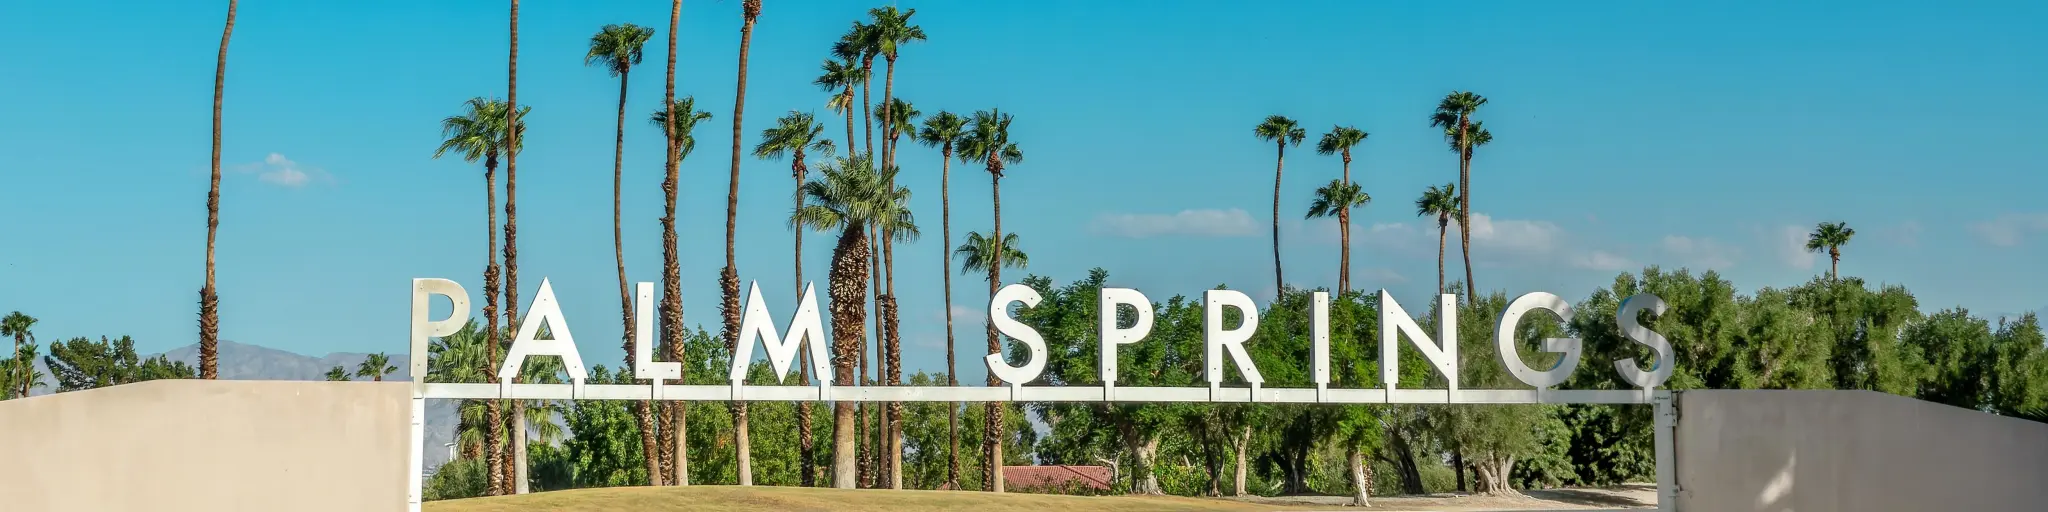 Palm Springs Welcome Sign with blue sky and palm trees